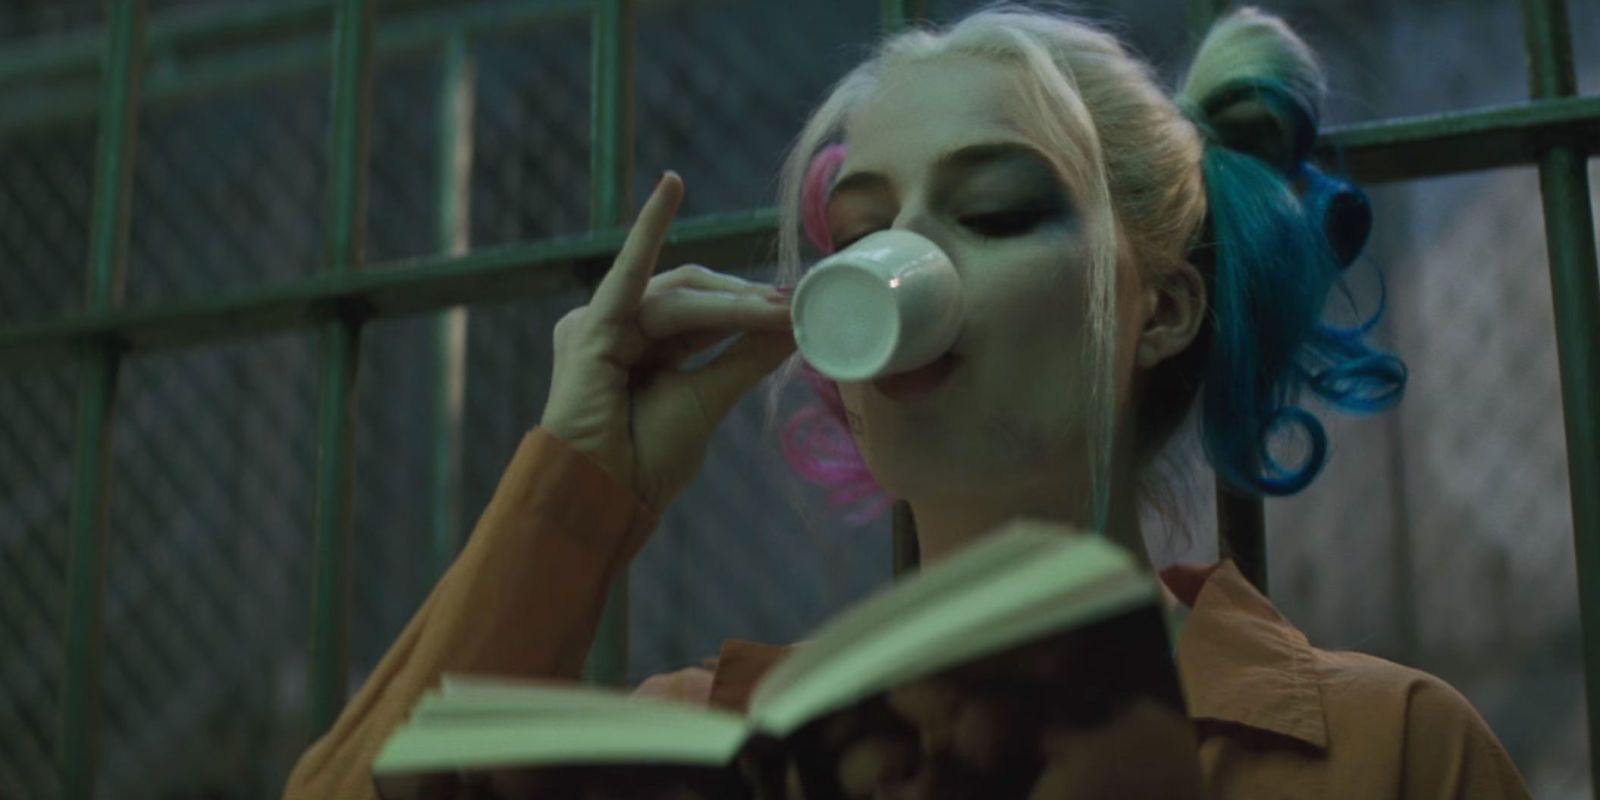 15 Things You Need To Know About Harley Quinn